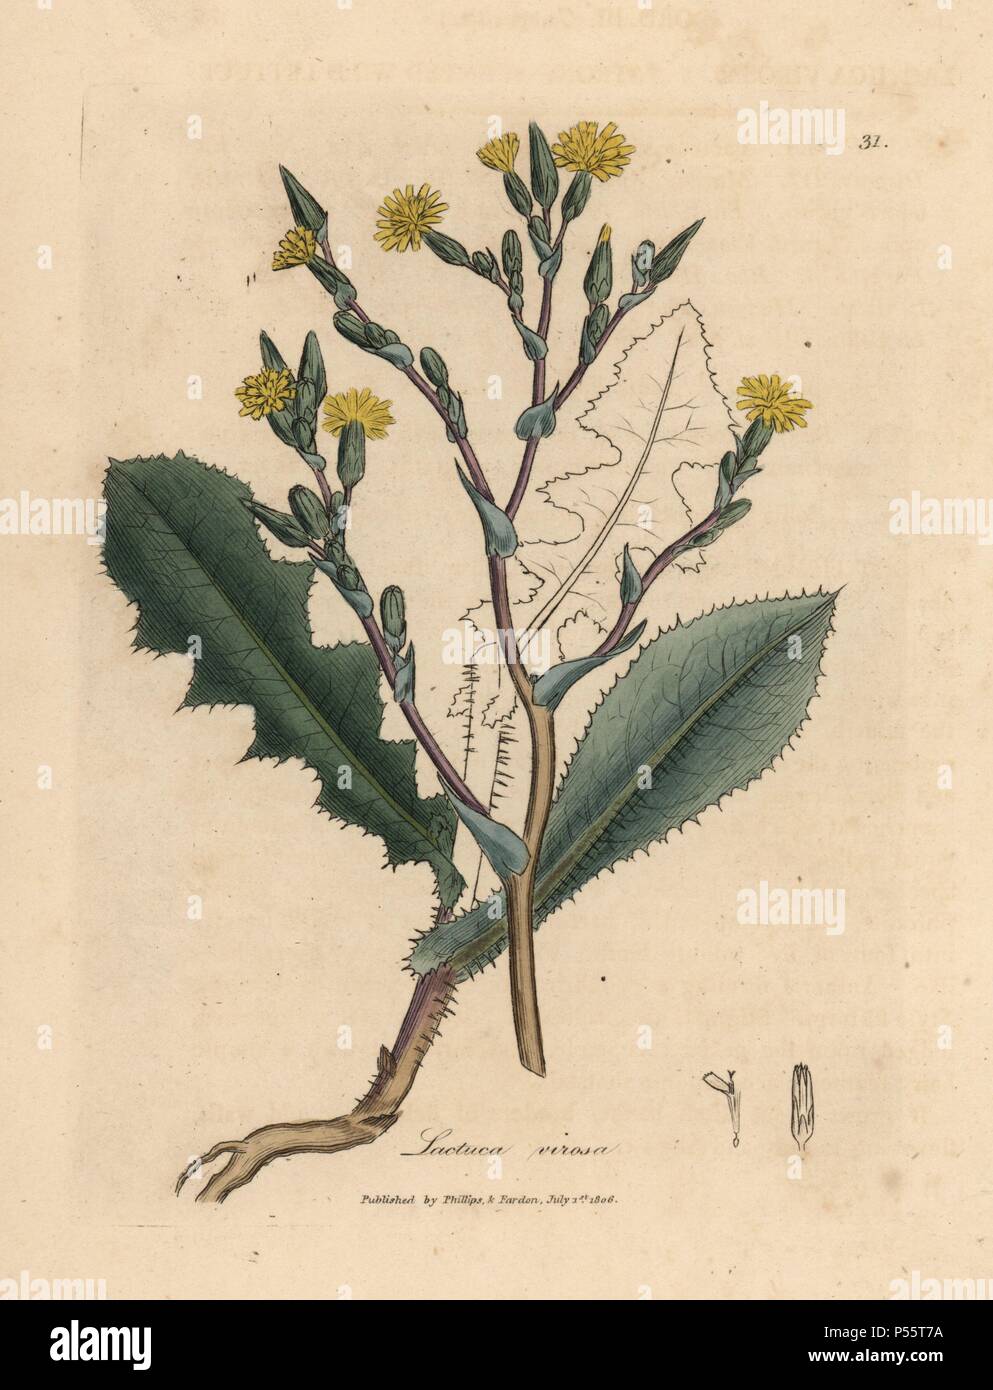 Yellow flowered, strong scented wild lettuce, Lactuca virosa. Handcolored copperplate engraving from a botanical illustration by James Sowerby from William Woodville and Sir William Jackson Hooker's 'Medical Botany' 1832. The tireless Sowerby (1757-1822) drew over 2,500 plants for Smith's mammoth 'English Botany' (1790-1814) and 440 mushrooms for 'Coloured Figures of English Fungi ' (1797) among many other works. Stock Photo